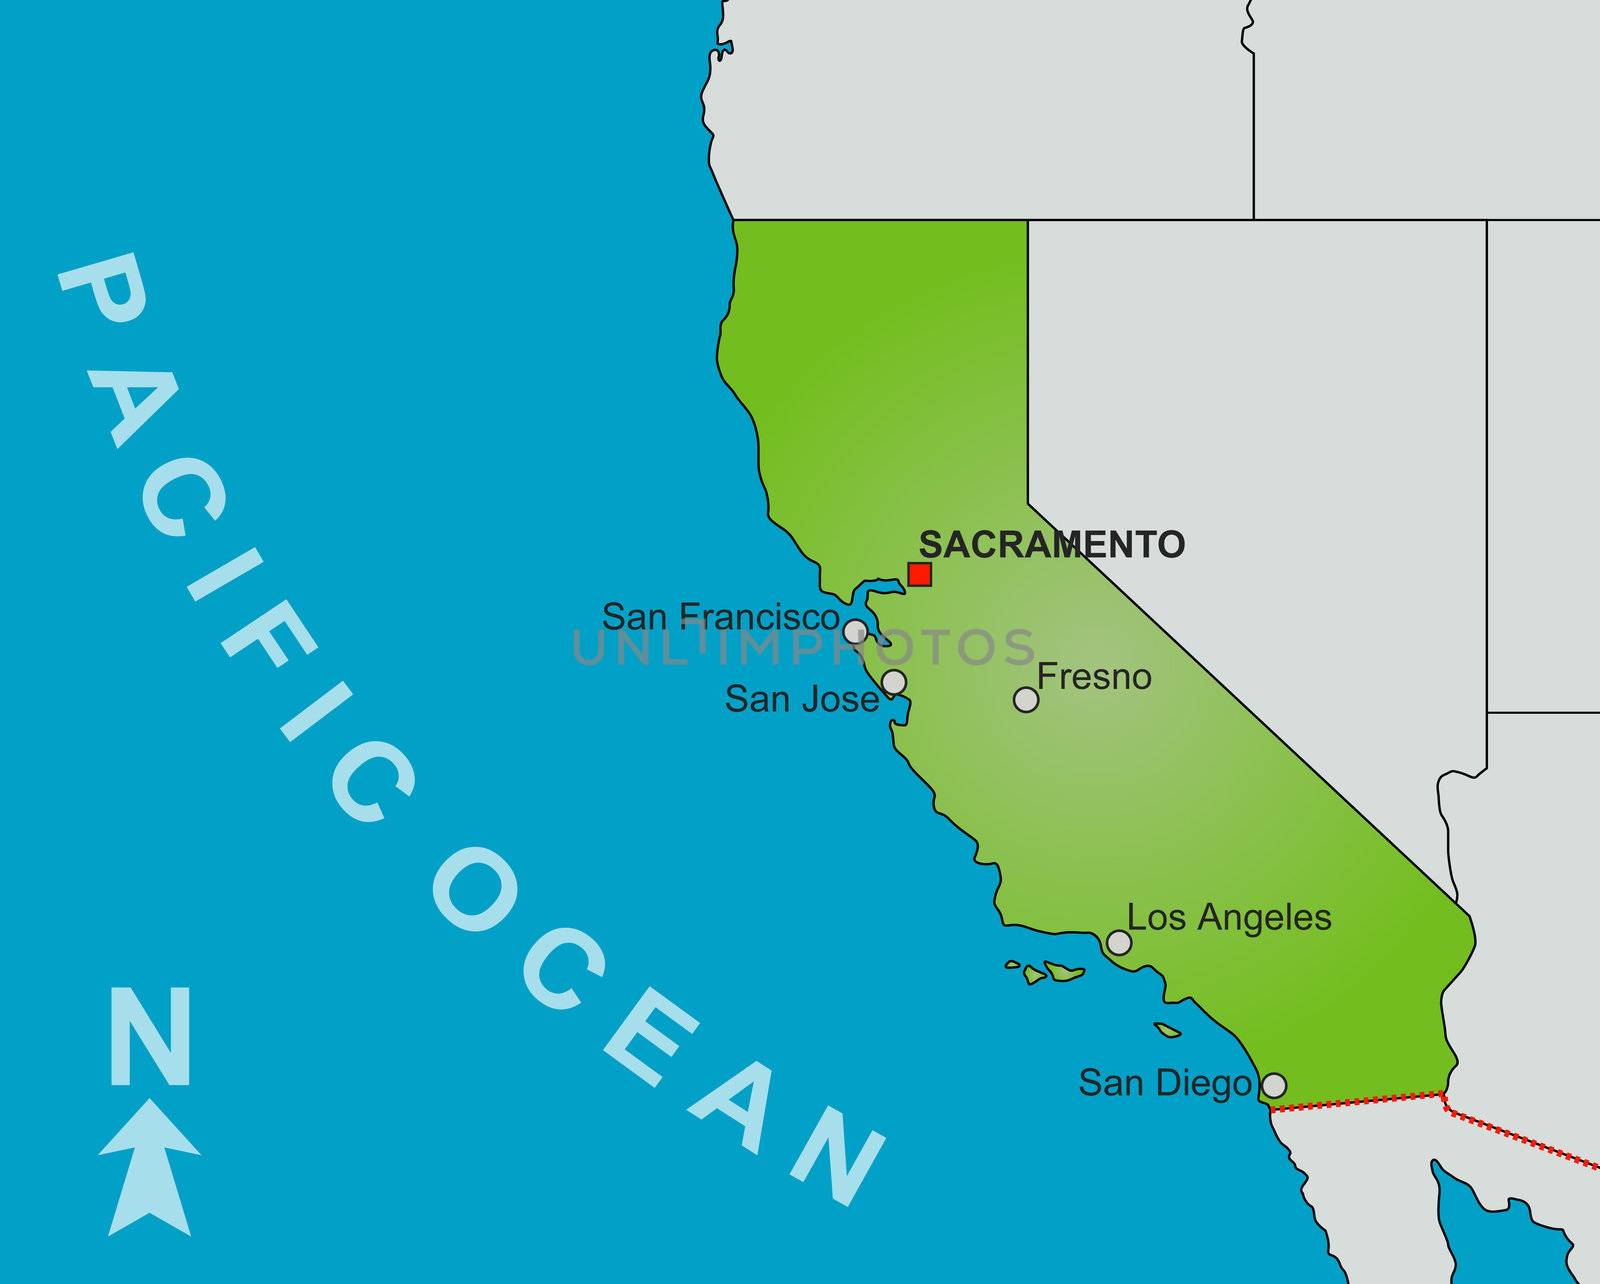 A stylized map of the state of California showing different big cities and nearby states.